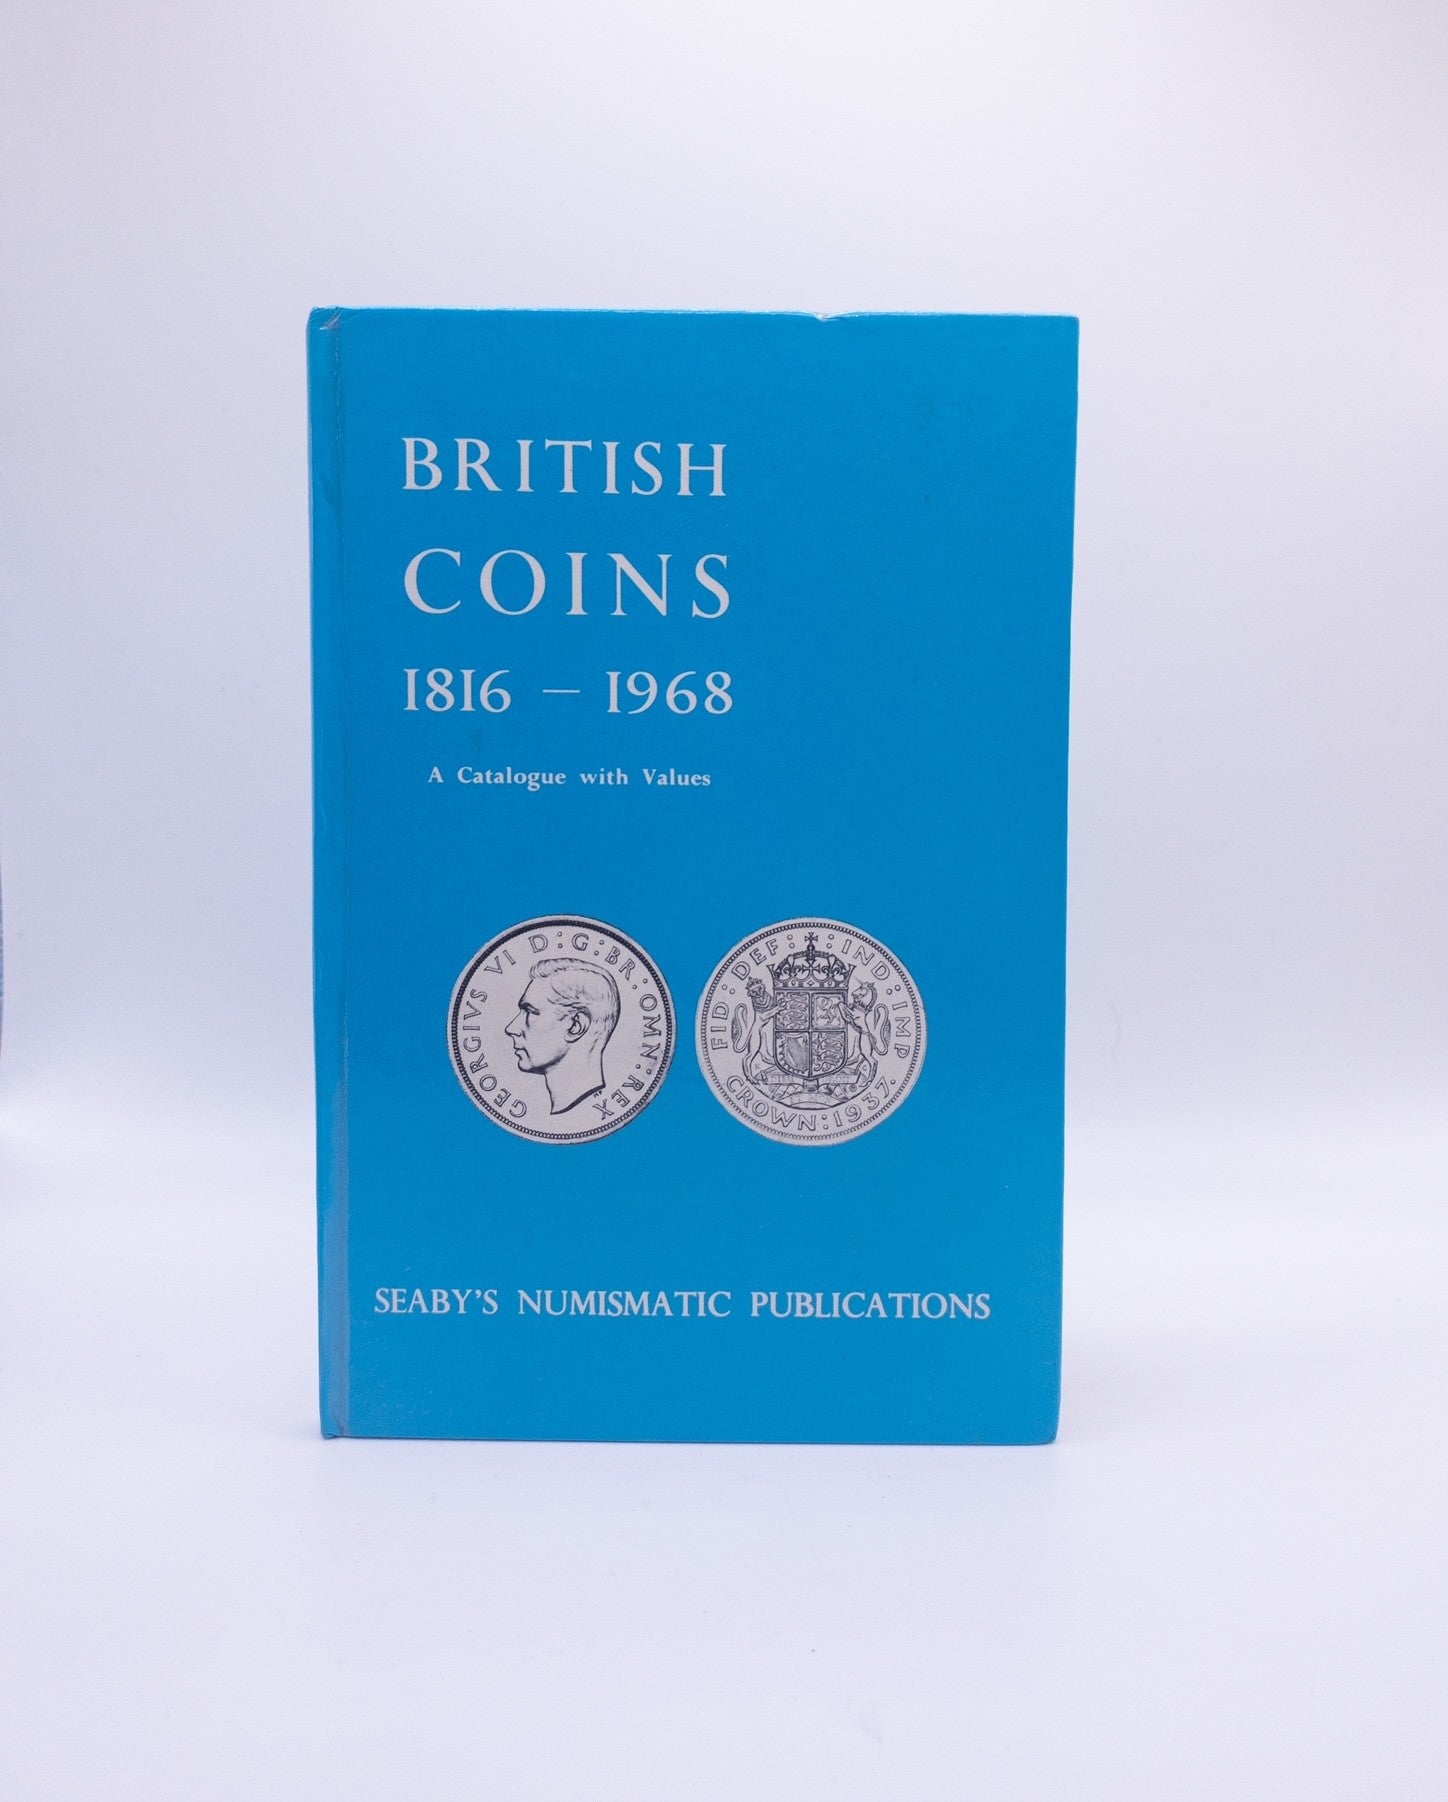 British Coins 1816-1968 | A Catalogue with Values published by B.A Seaby